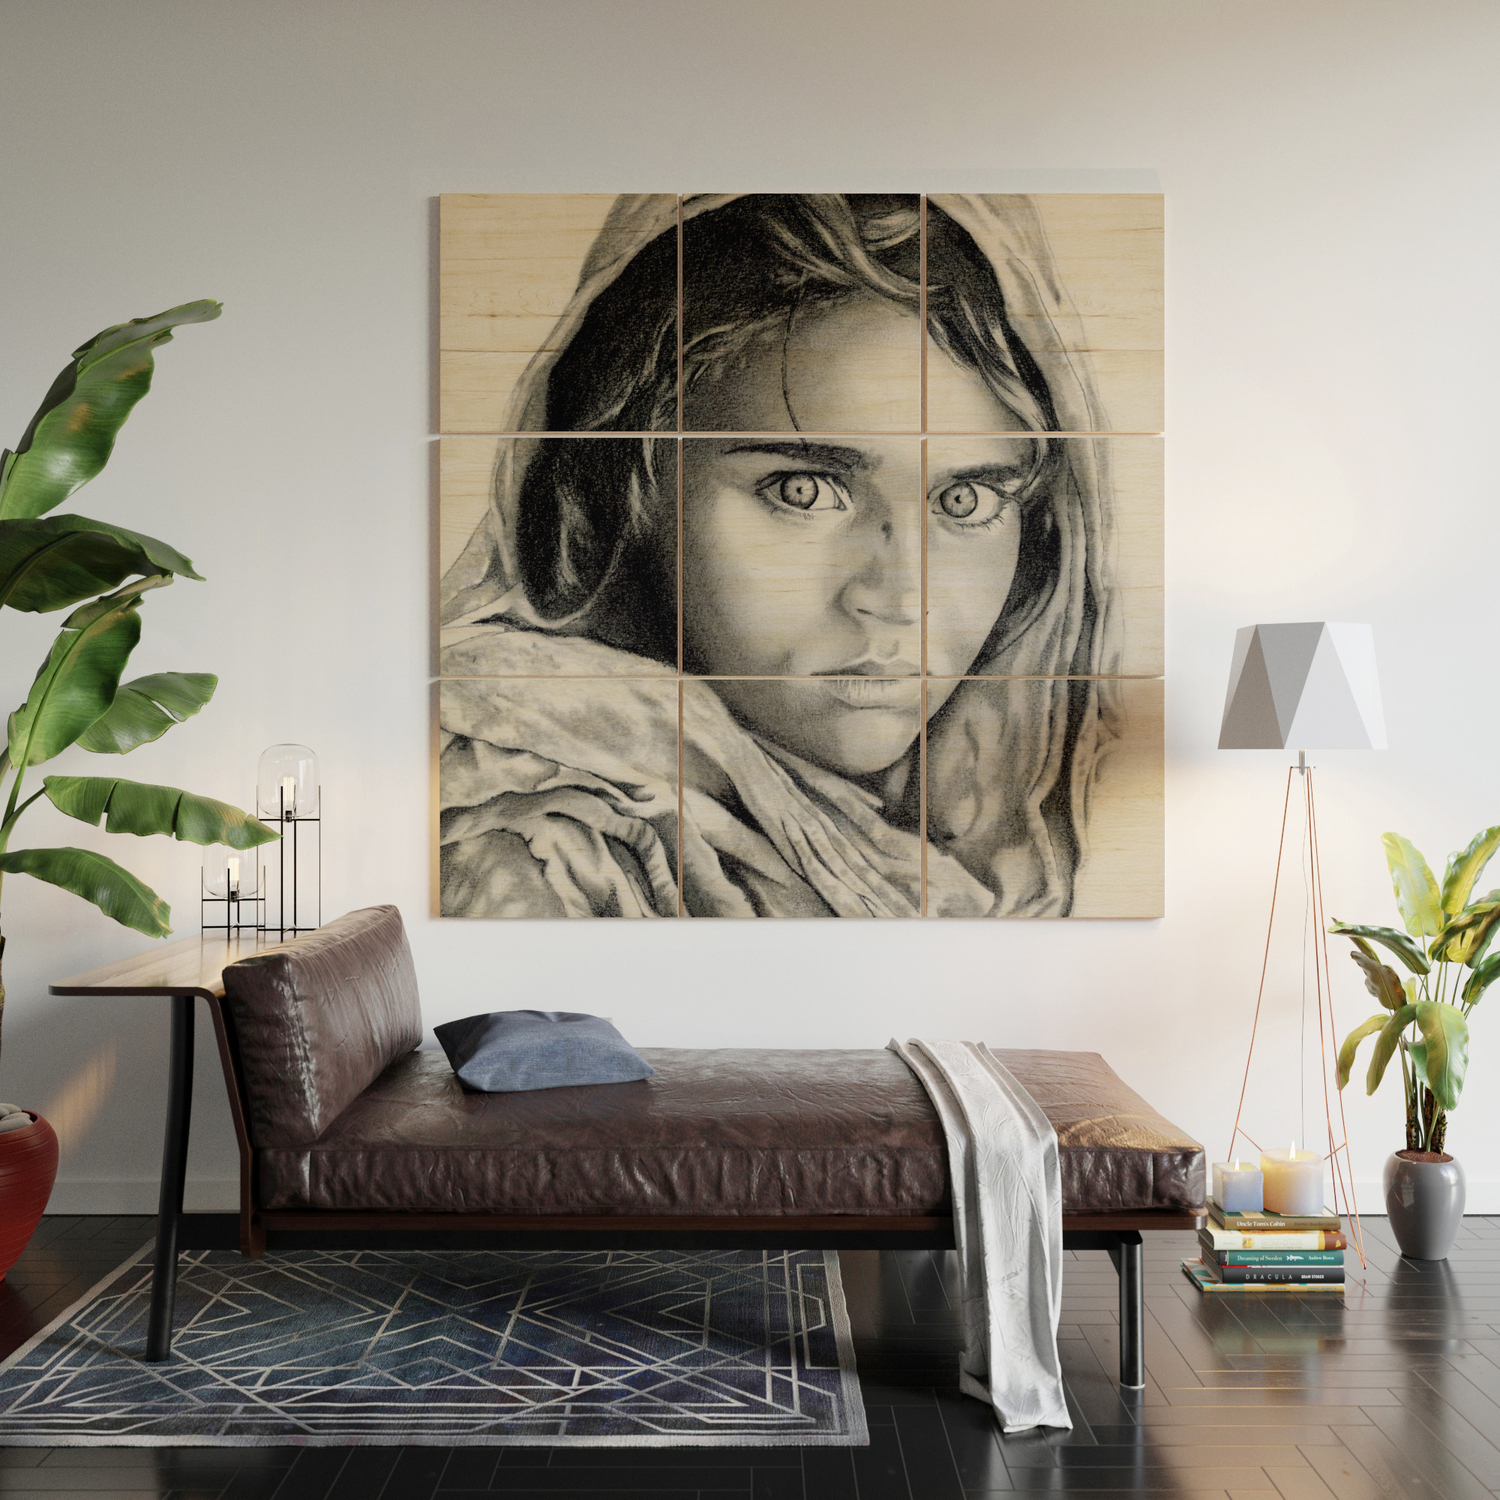 AFGHAN GIRL PHOTO PICTURE PRINT ON WOOD FRAMED CANVAS WALL ART home DECORATION 